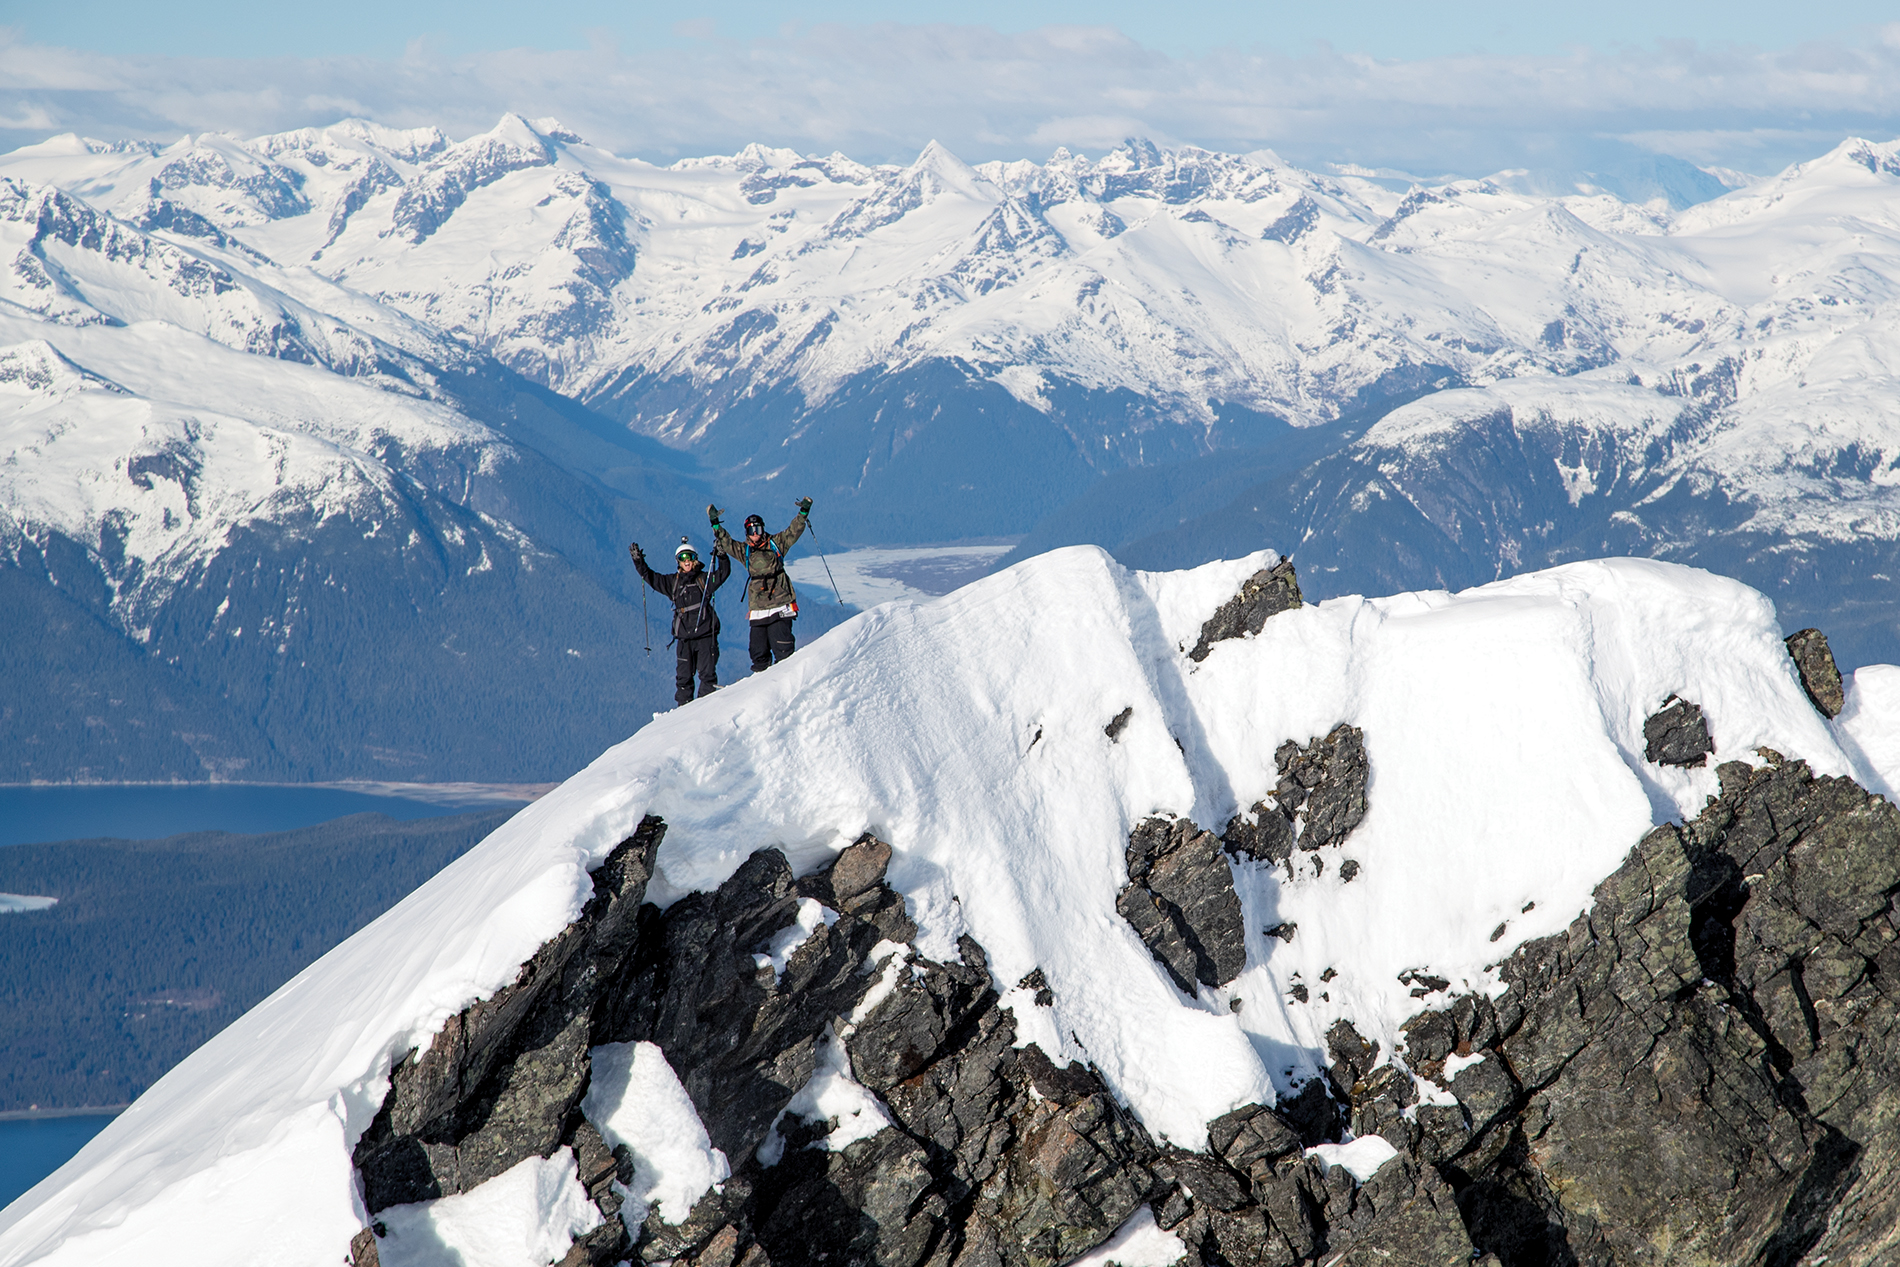 Henrik Harlaut and Tanner Hall, stoked in Haines.